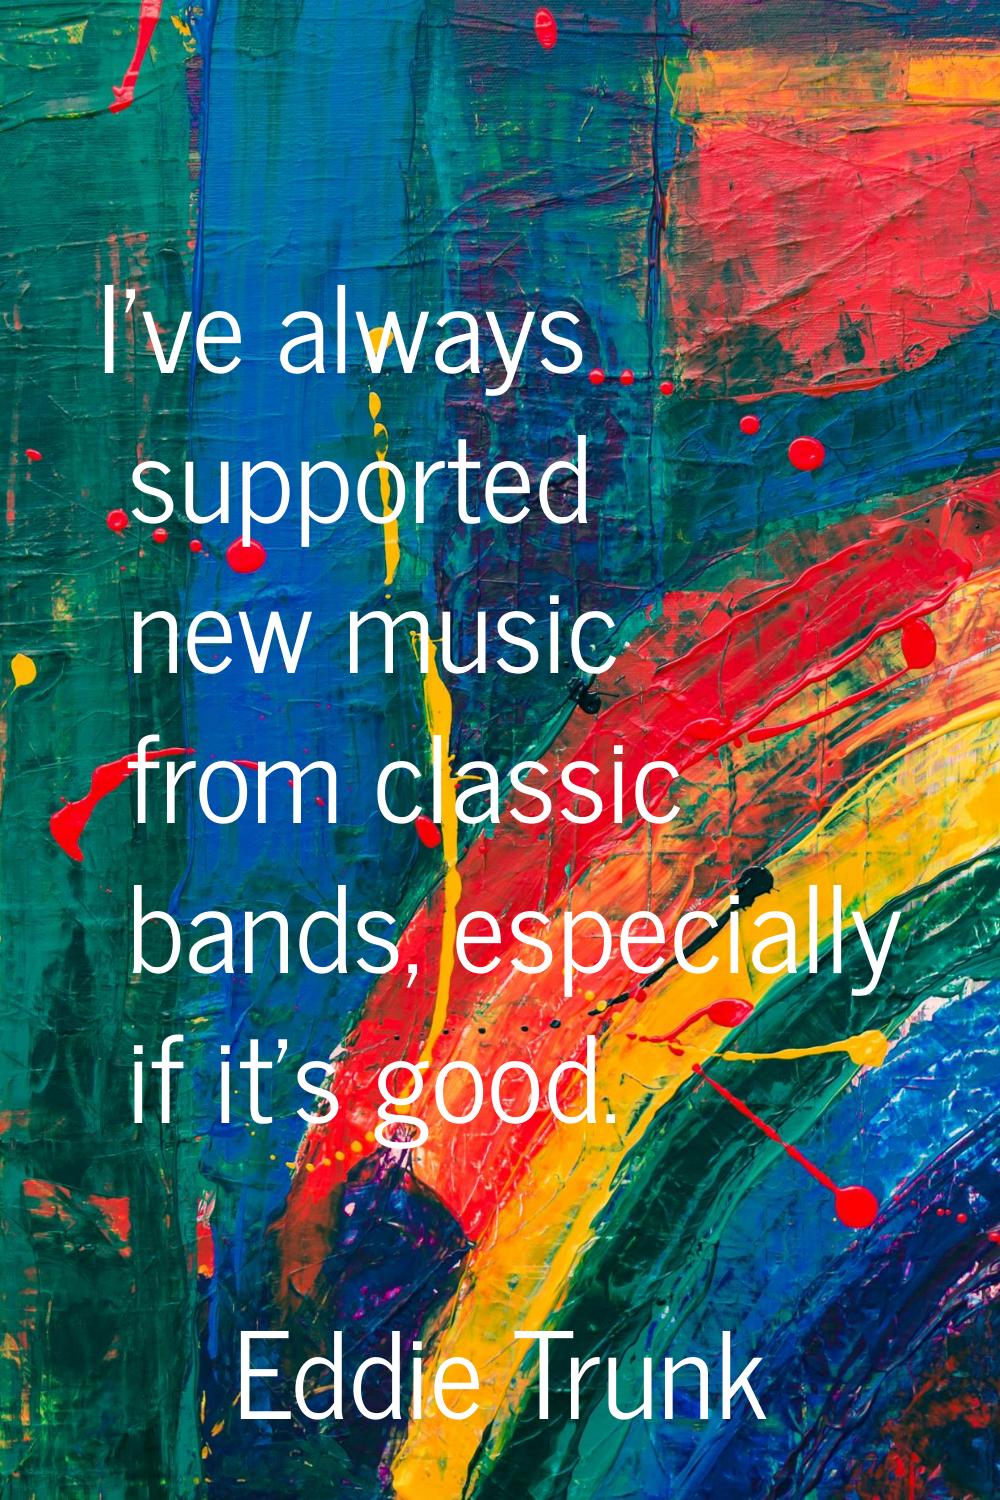 I've always supported new music from classic bands, especially if it's good.